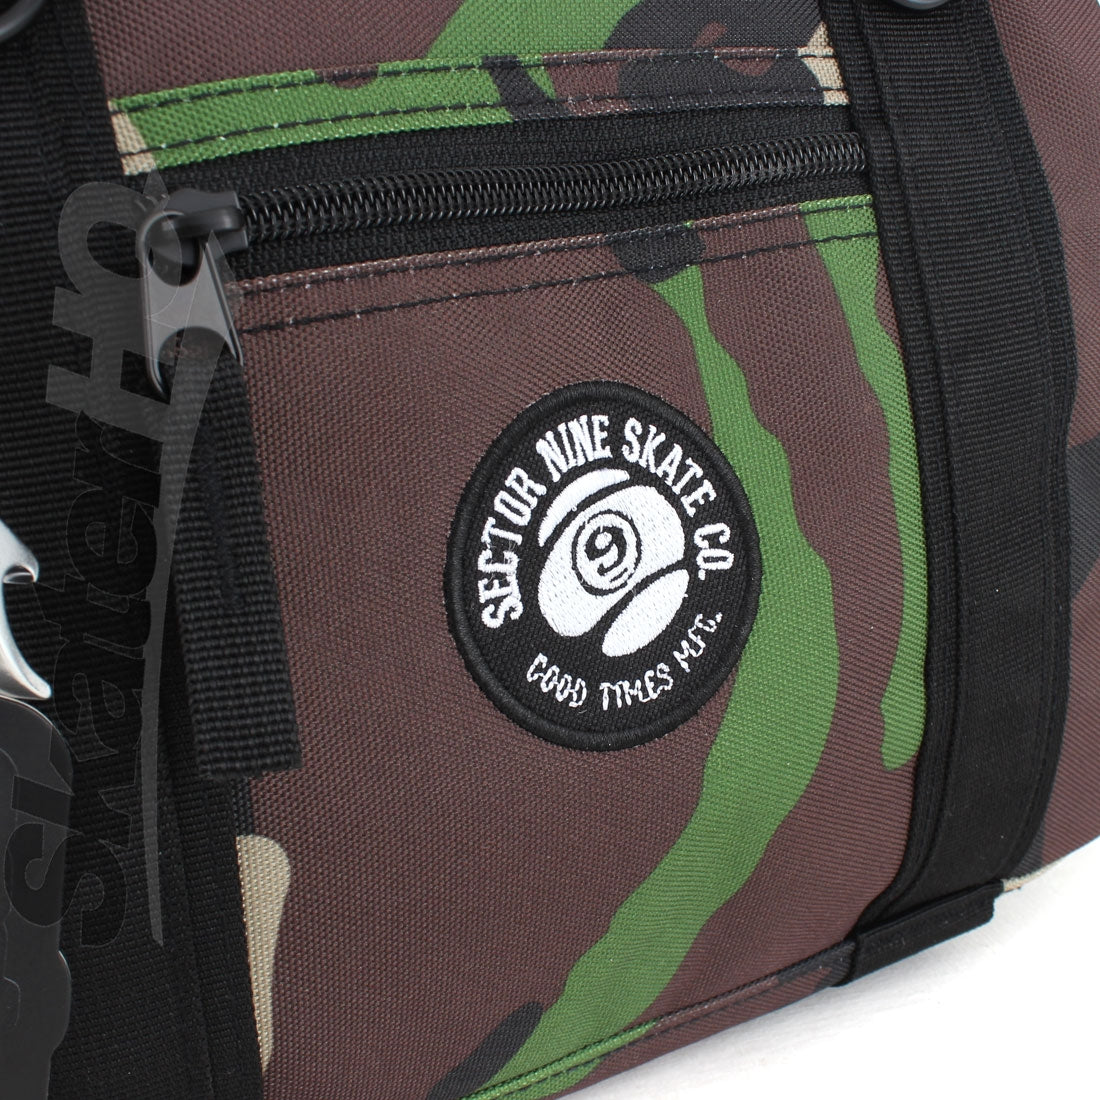 Sector 9 Field Cooler Bag - Camo Bags and Backpacks